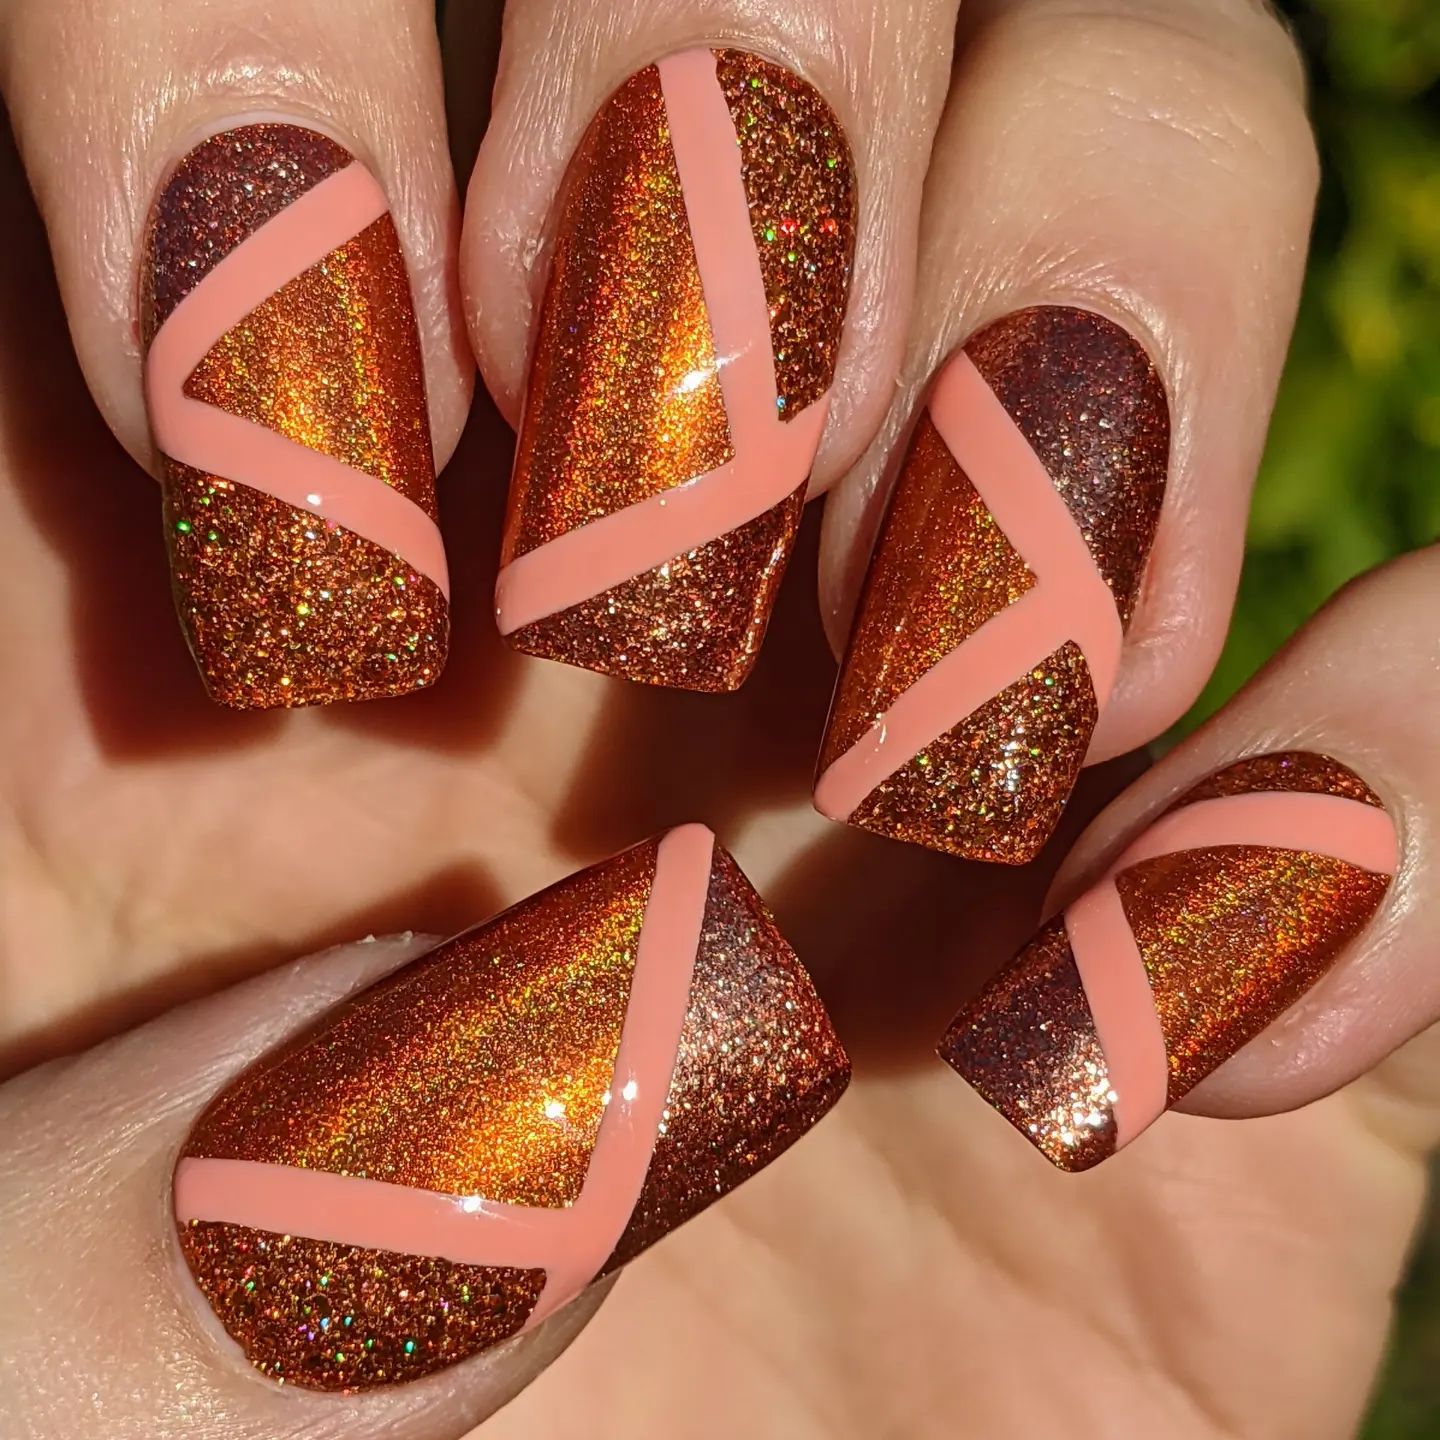 Brown and orange colors get better when they are paired in a nail art like the one above. Every time you move your nails, they will shine in different angles. Doesn't it sound exciting?